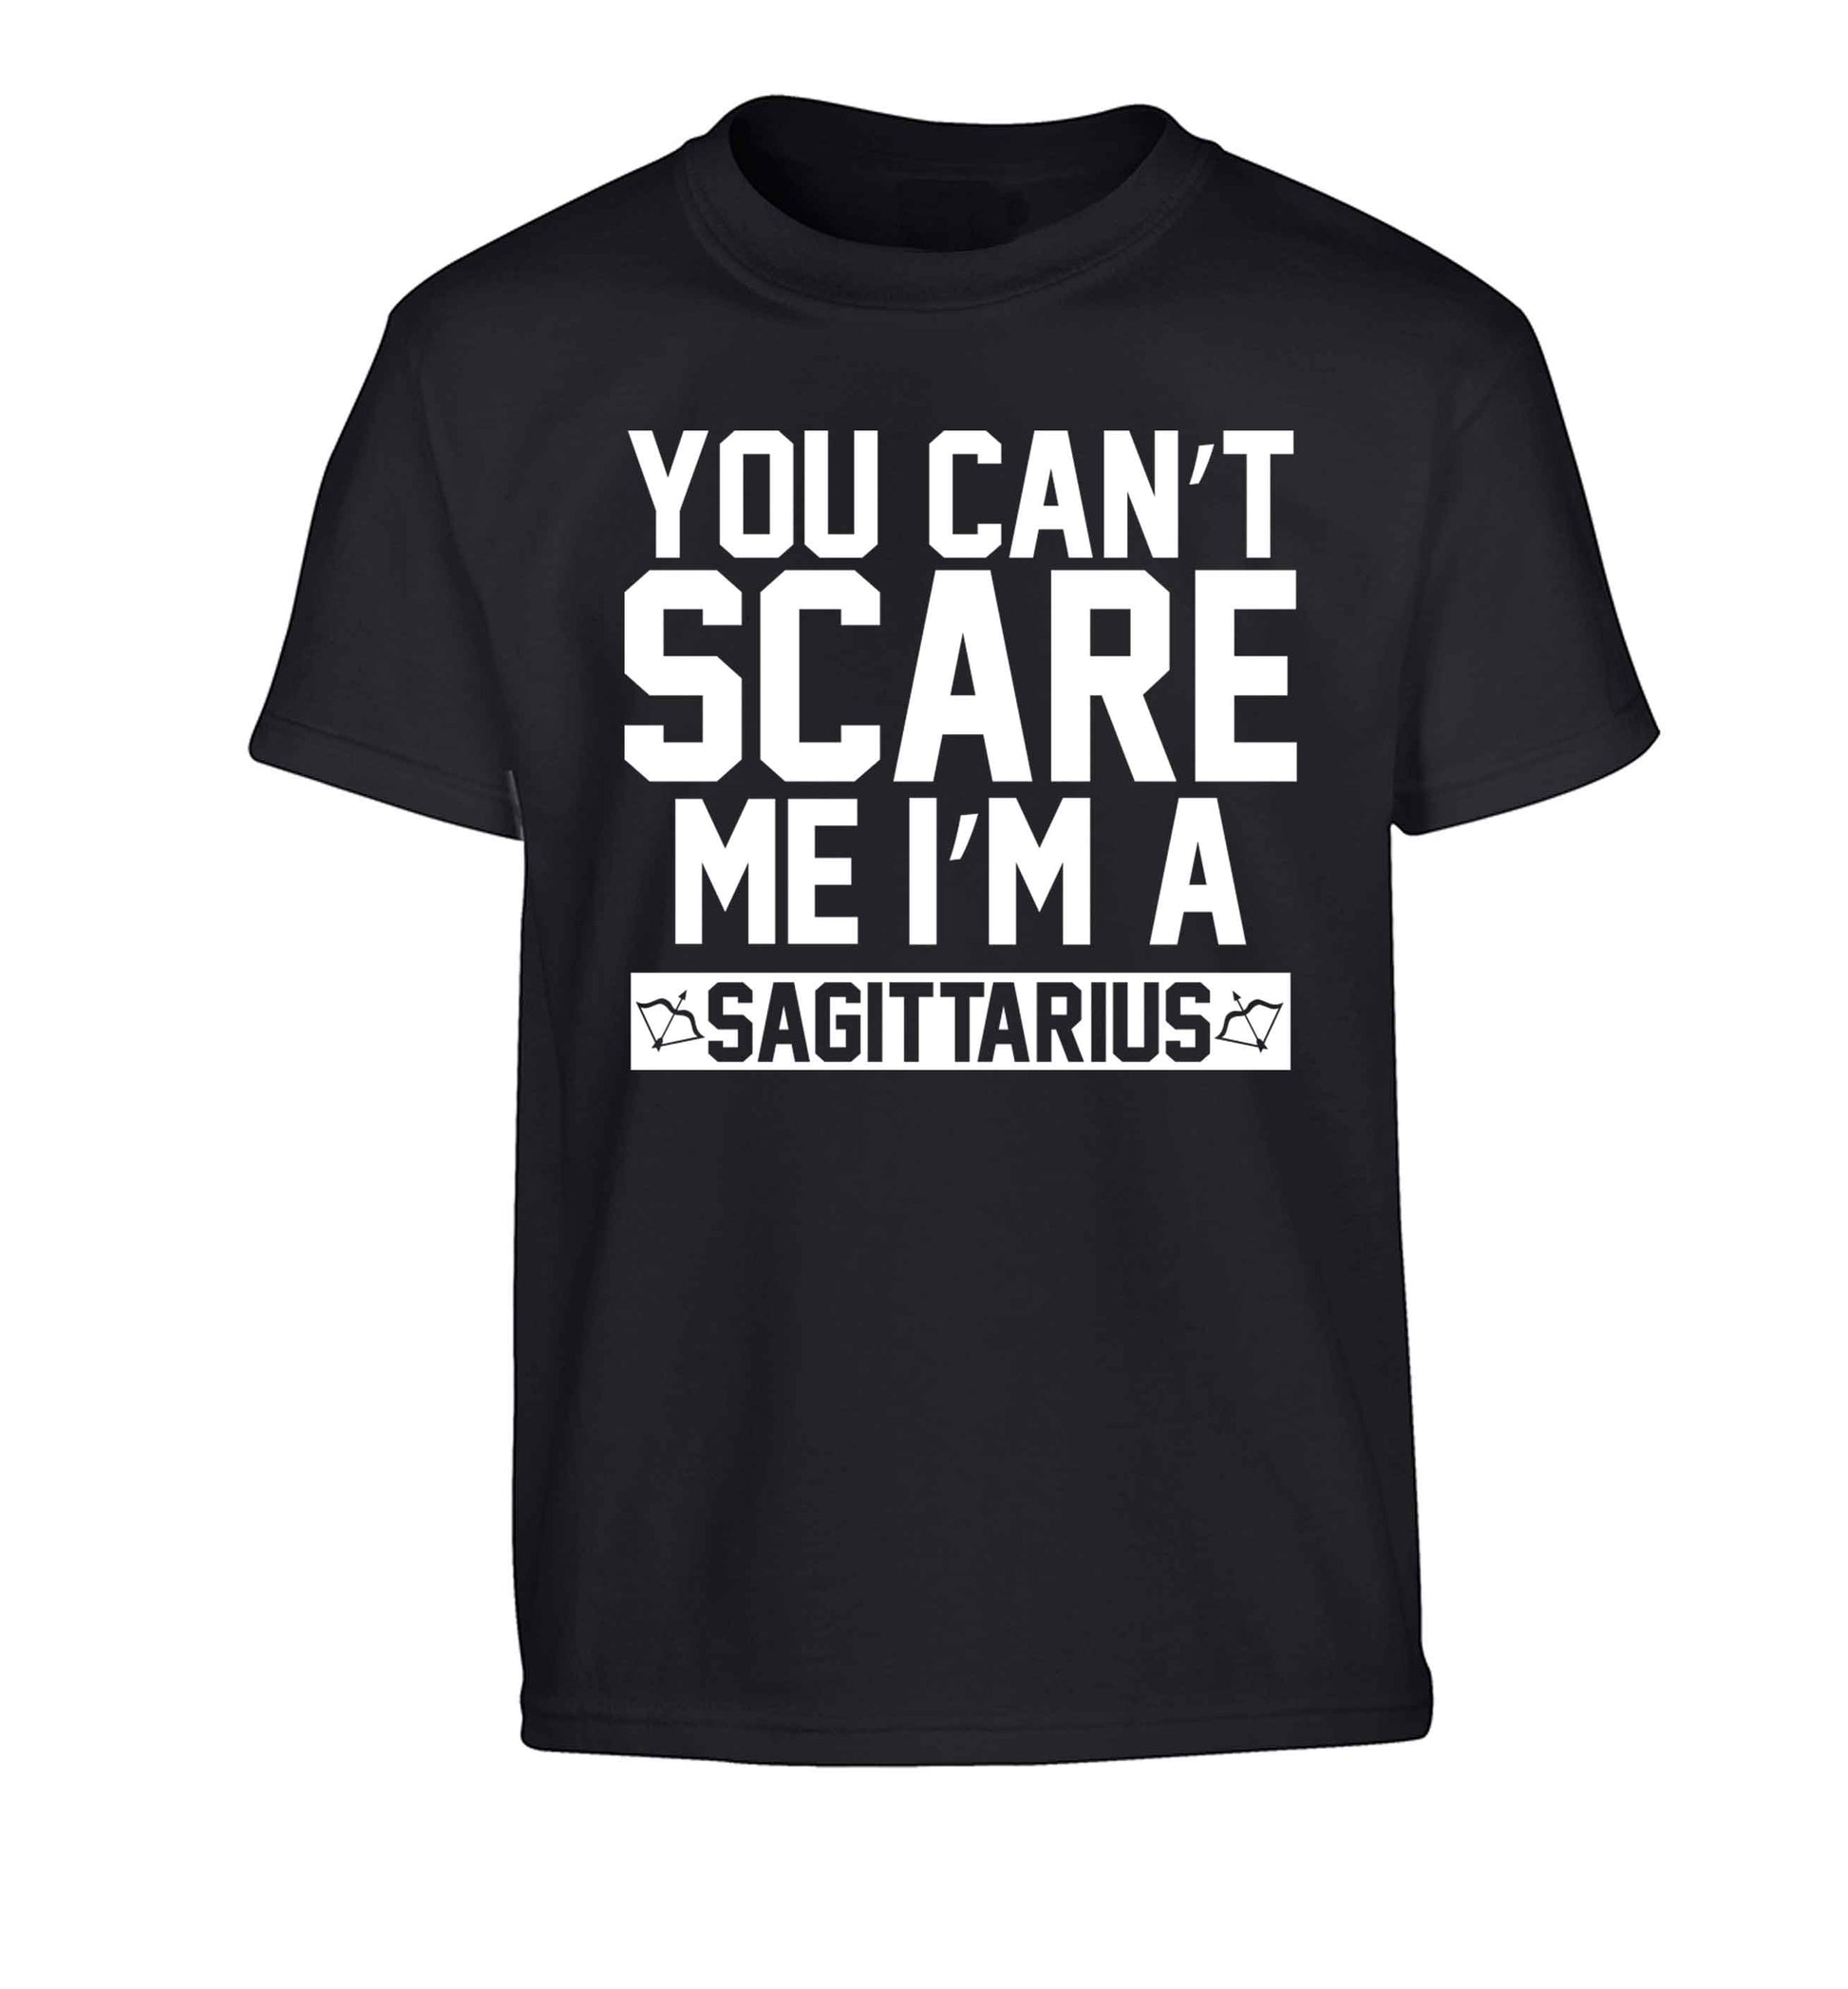 You can't scare me I'm a sagittarius Children's black Tshirt 12-13 Years